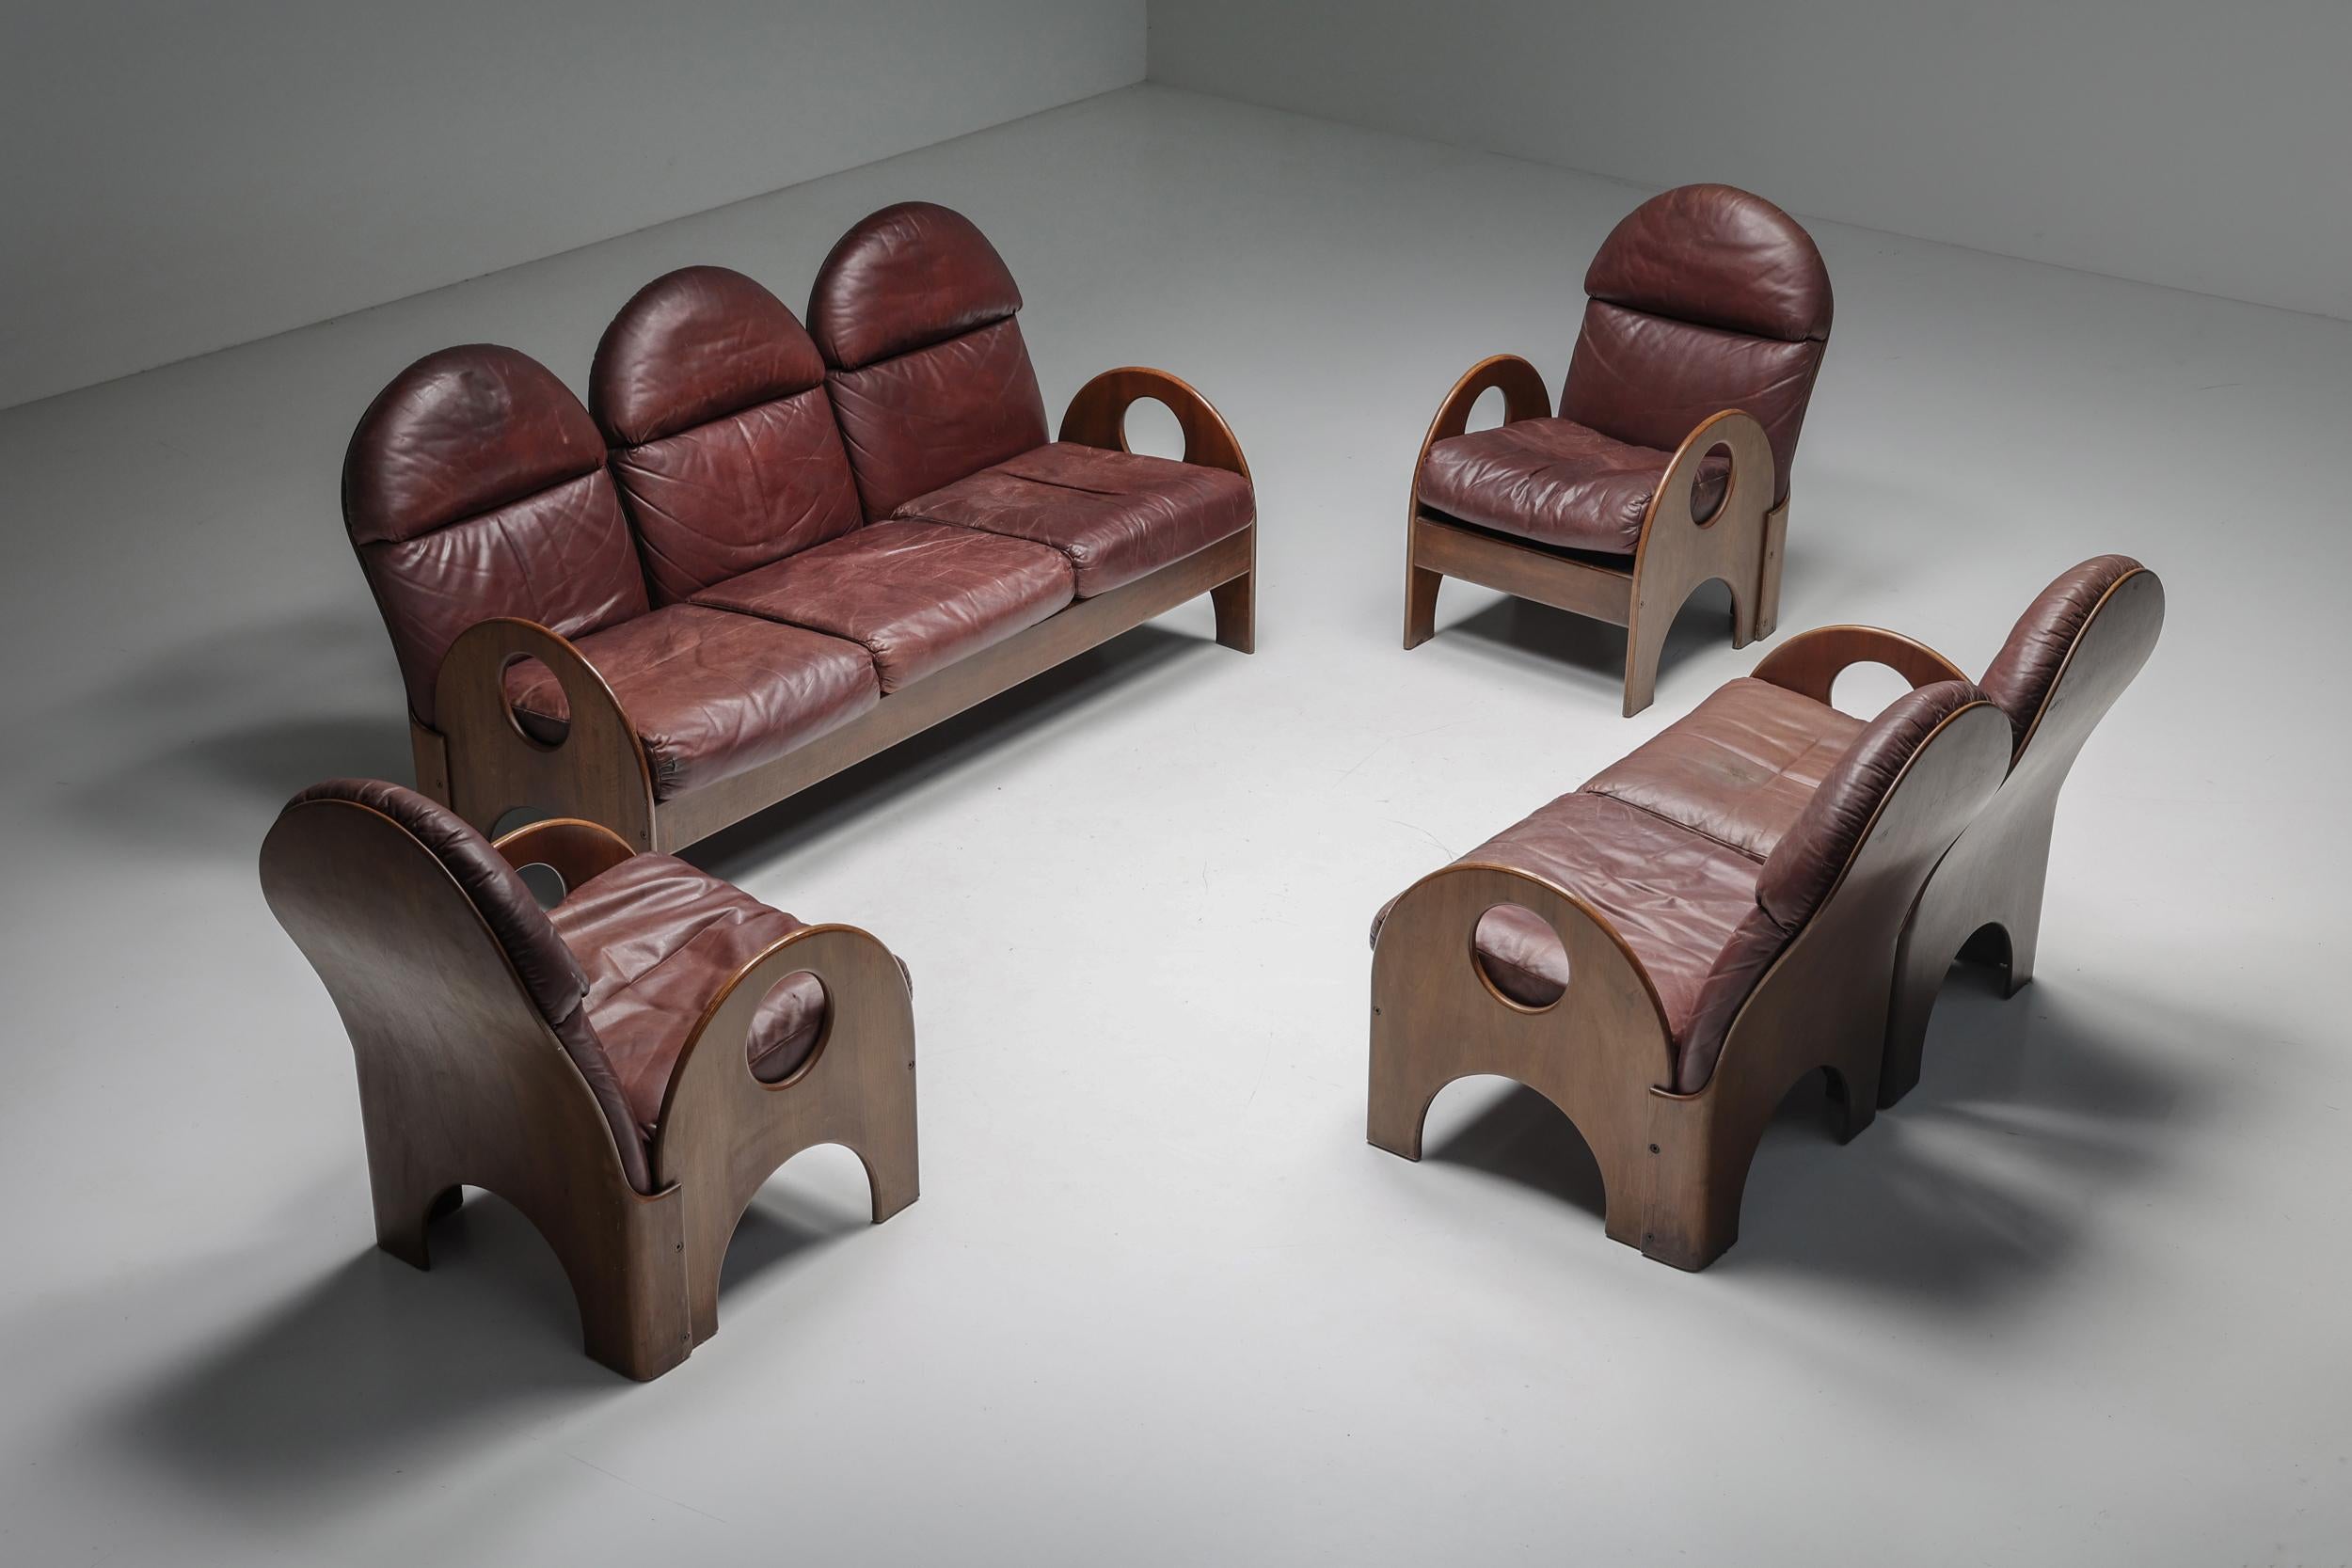 Pair of 'Arcata' Easy Chairs by Gae Aulenti, Walnut and Burgundy Leather, 1968 For Sale 7